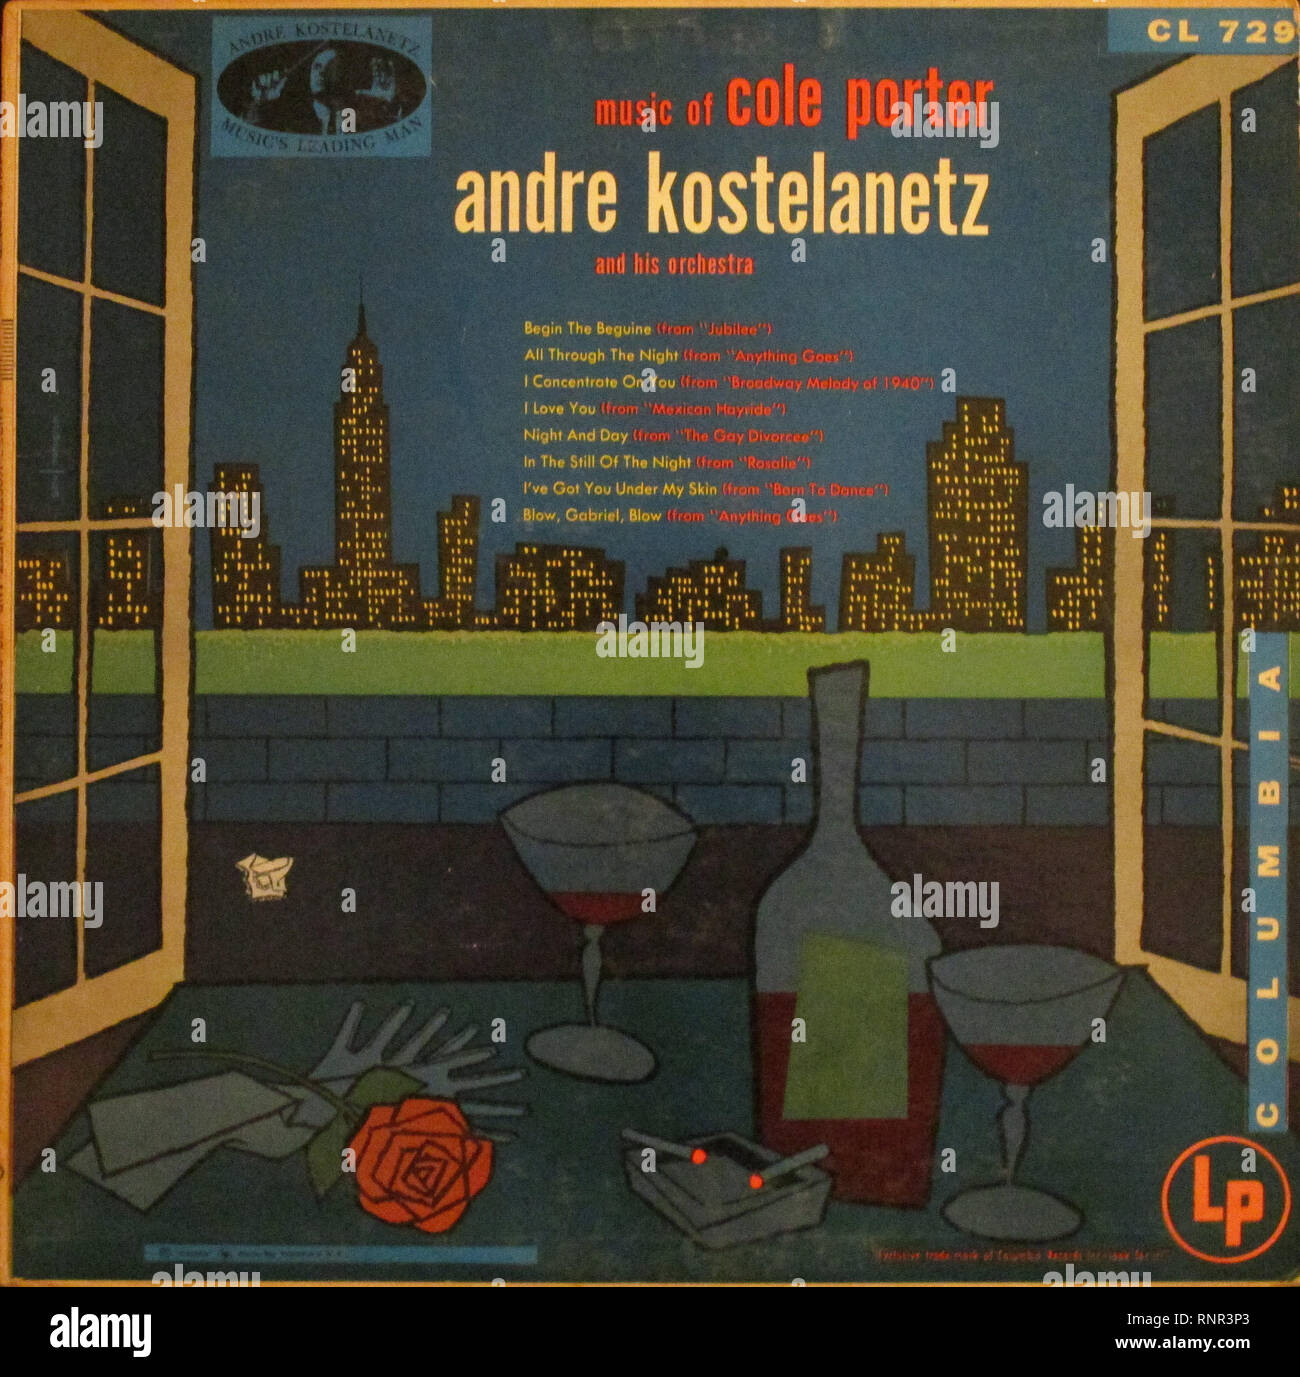 Vintage Vinyl Lp Cover Music Of Cole Porter Andre Kostelanetz  His Orchestra 1955 Stock Photo